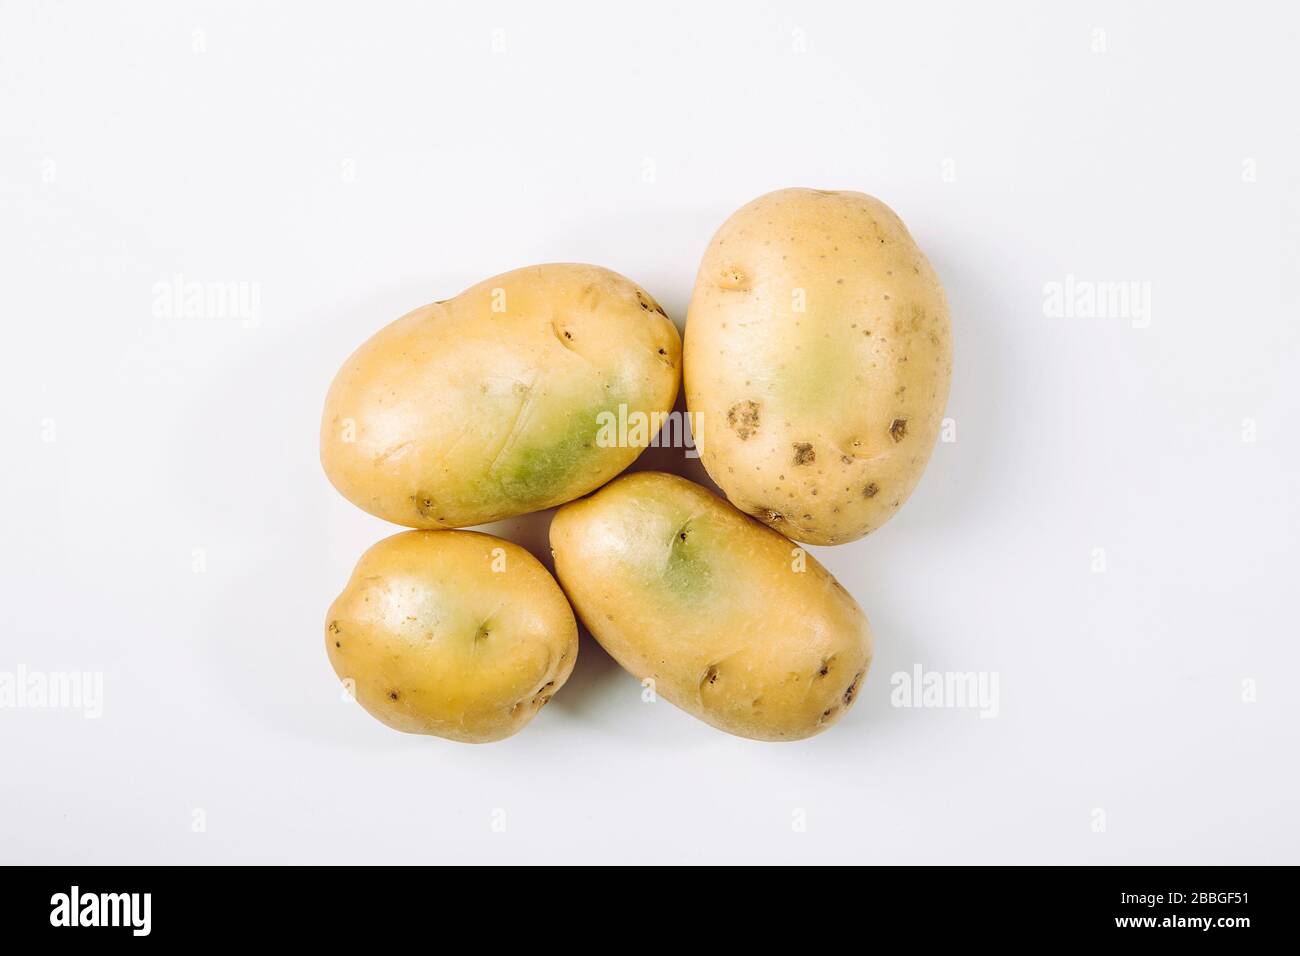 Sunlight and warmth turn potatoes skin green witch contain high levels of a toxin, solanine which can cause sickness and is poisonous. Do not buy and Stock Photo